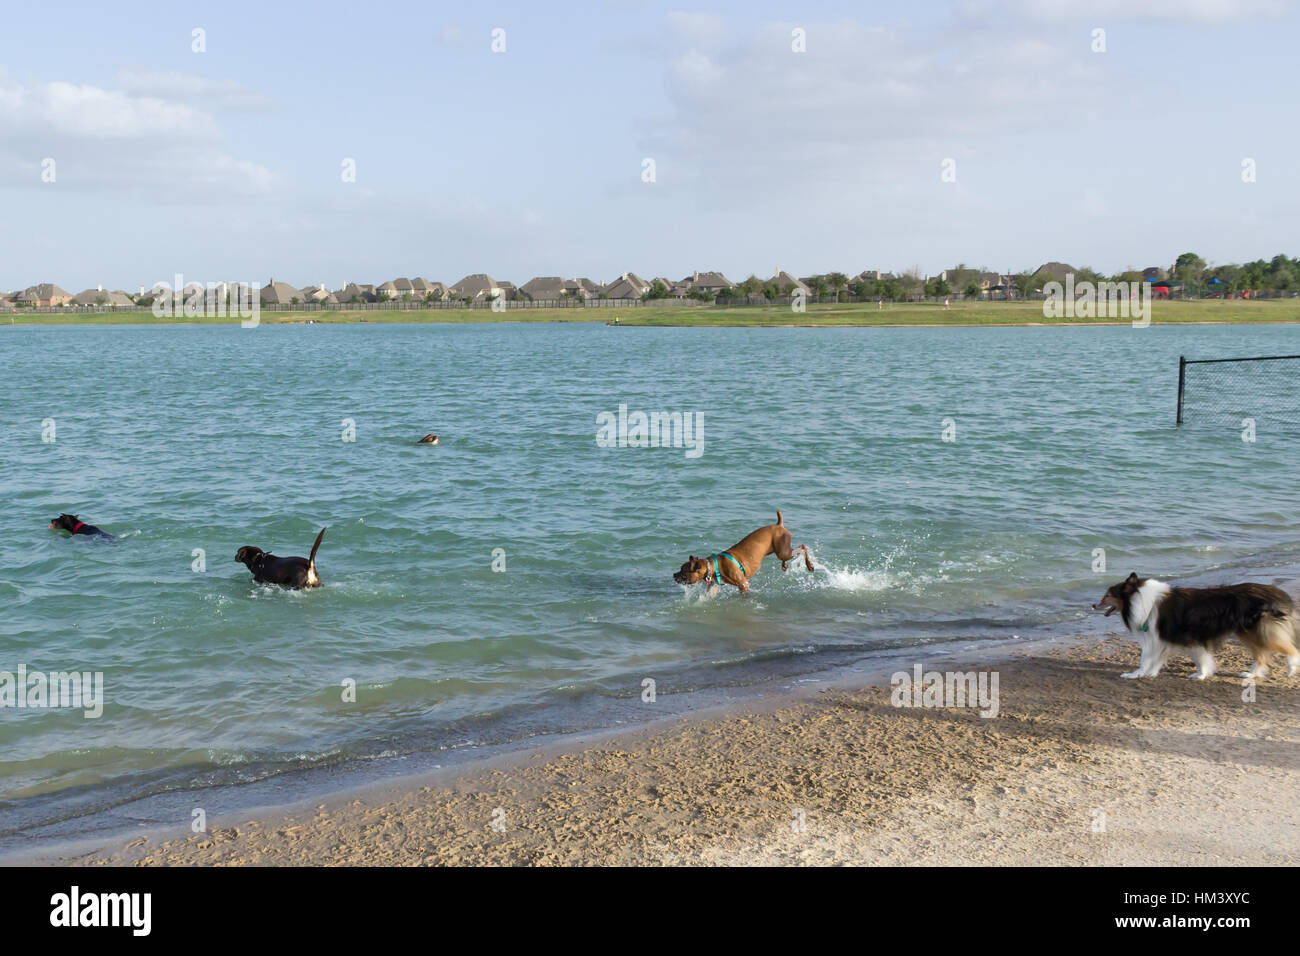 Aquatic canine fun for a group of mutts at the beach of a dog park retention pond Stock Photo